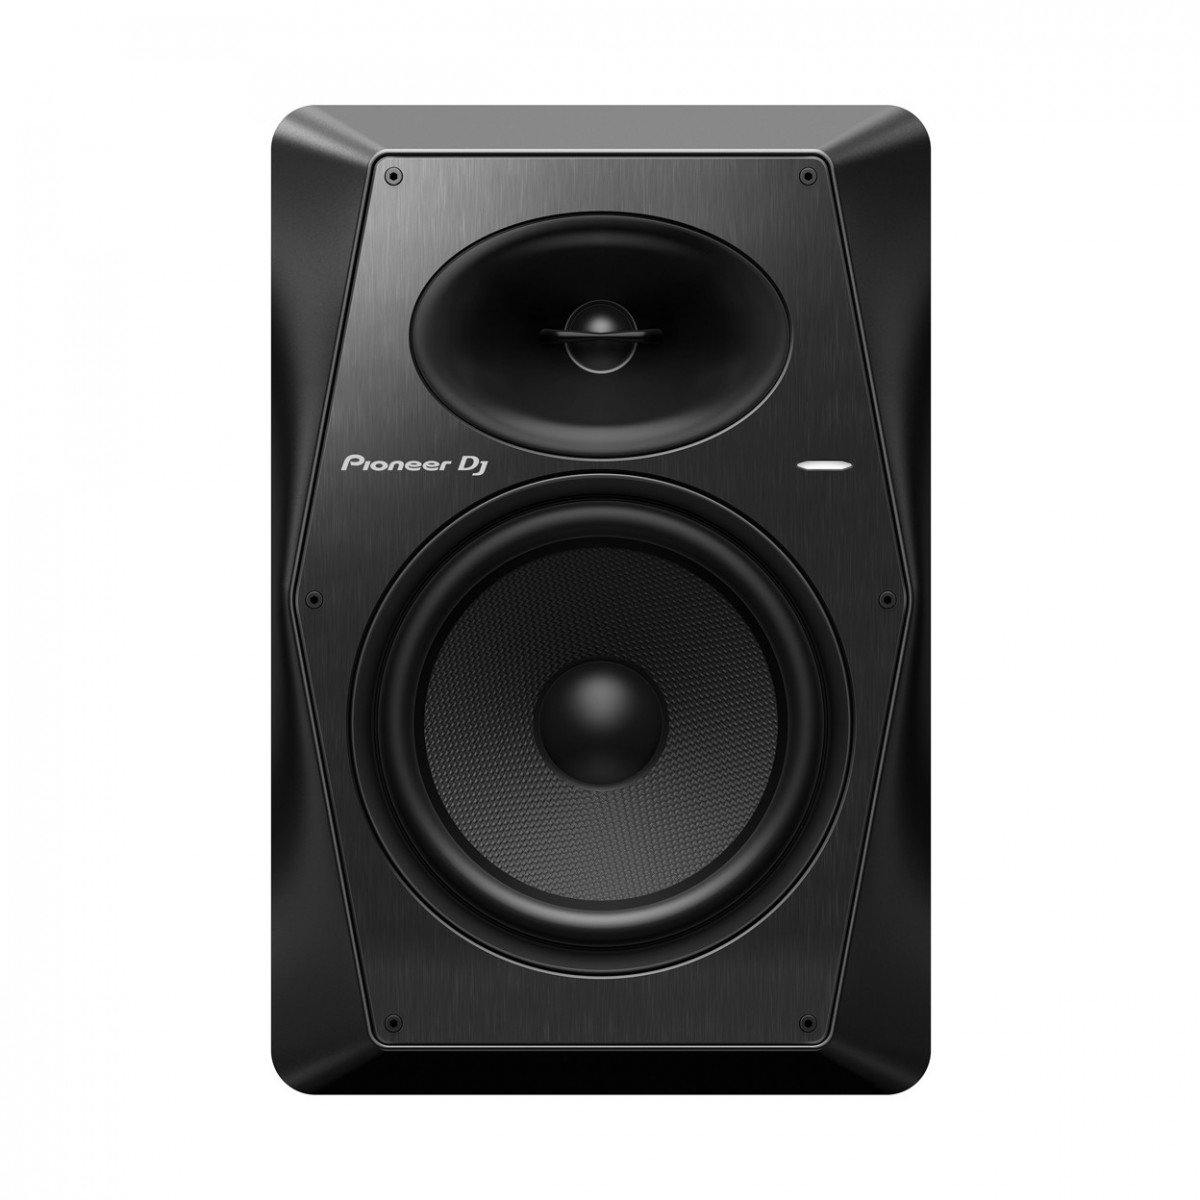 2 x Pioneer VM-80 8"Active Monitor Speakers Black - DY Pro Audio